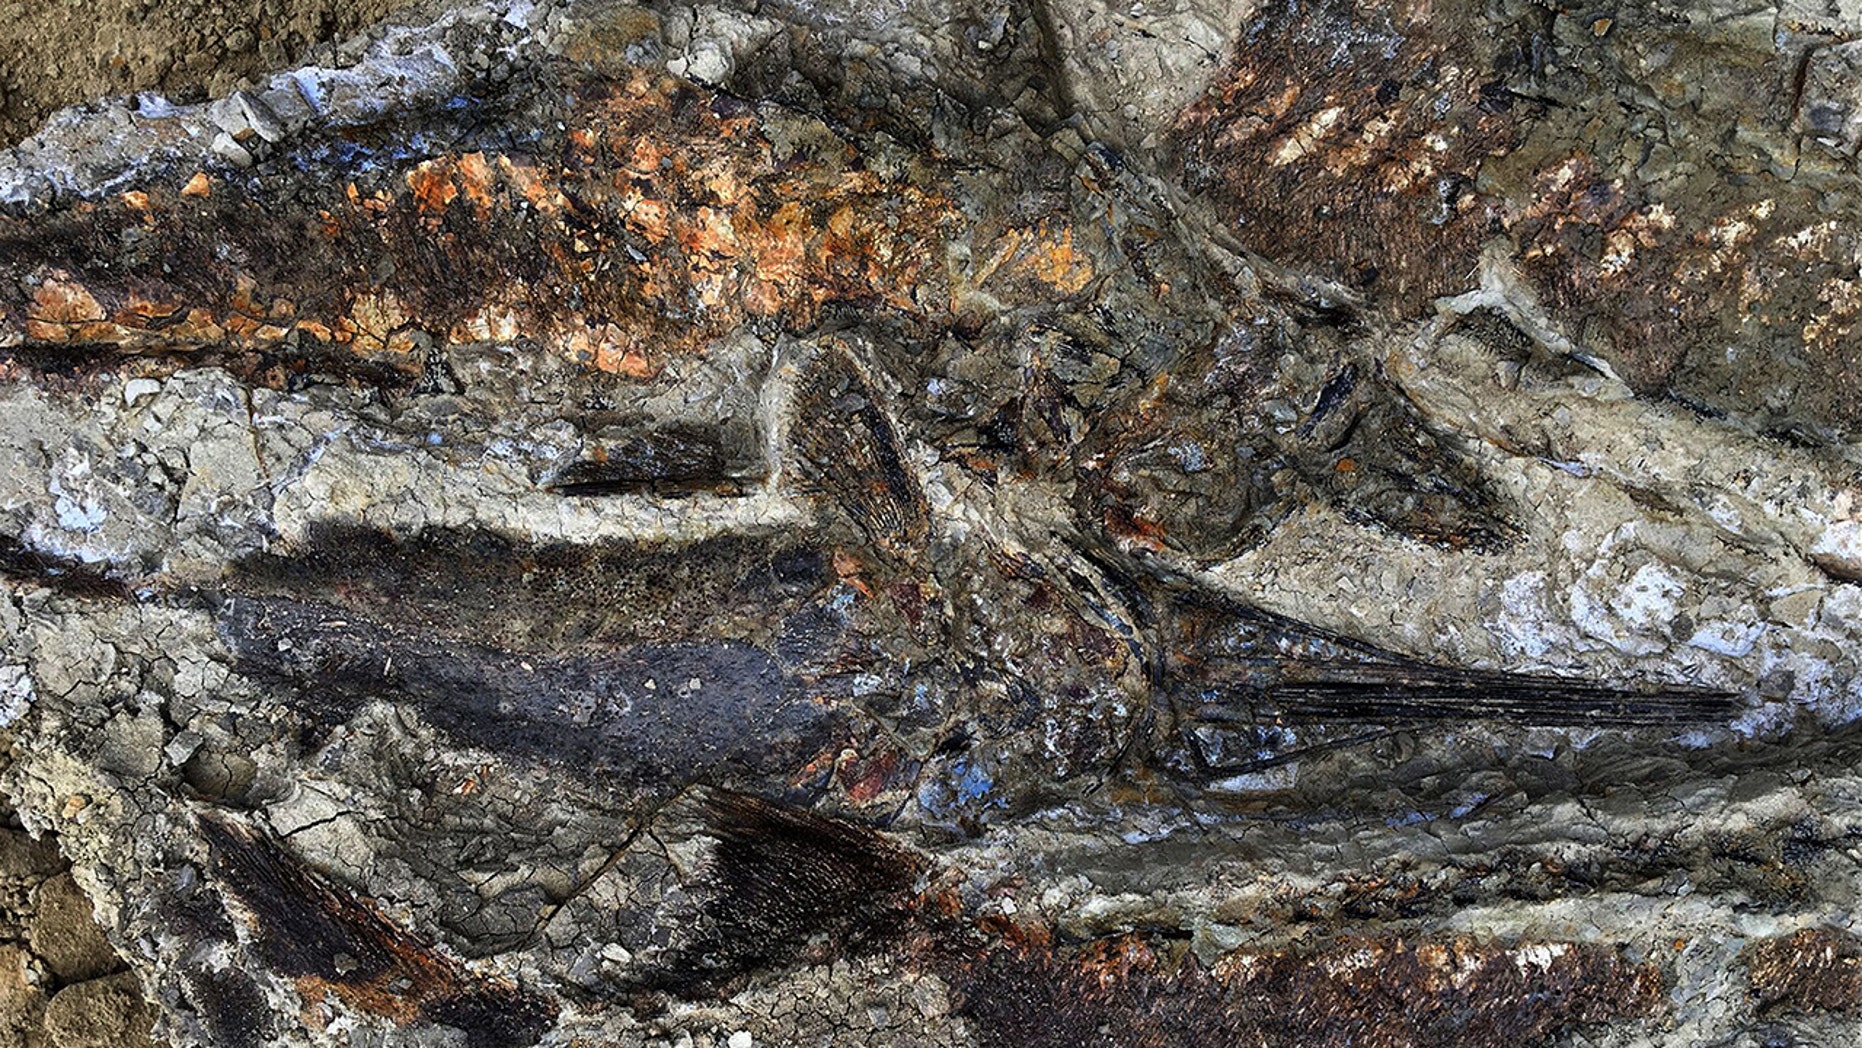 This photo, obtained on March 30, 2019 with the kind permission of the University of Kansas, shows a 66 million year old fish fossil, partially exposed and perfectly preserved, unearthed by Robert DePalma and his colleagues. - (Credit: ROBERT DEPALMA / AFP / Getty Images)